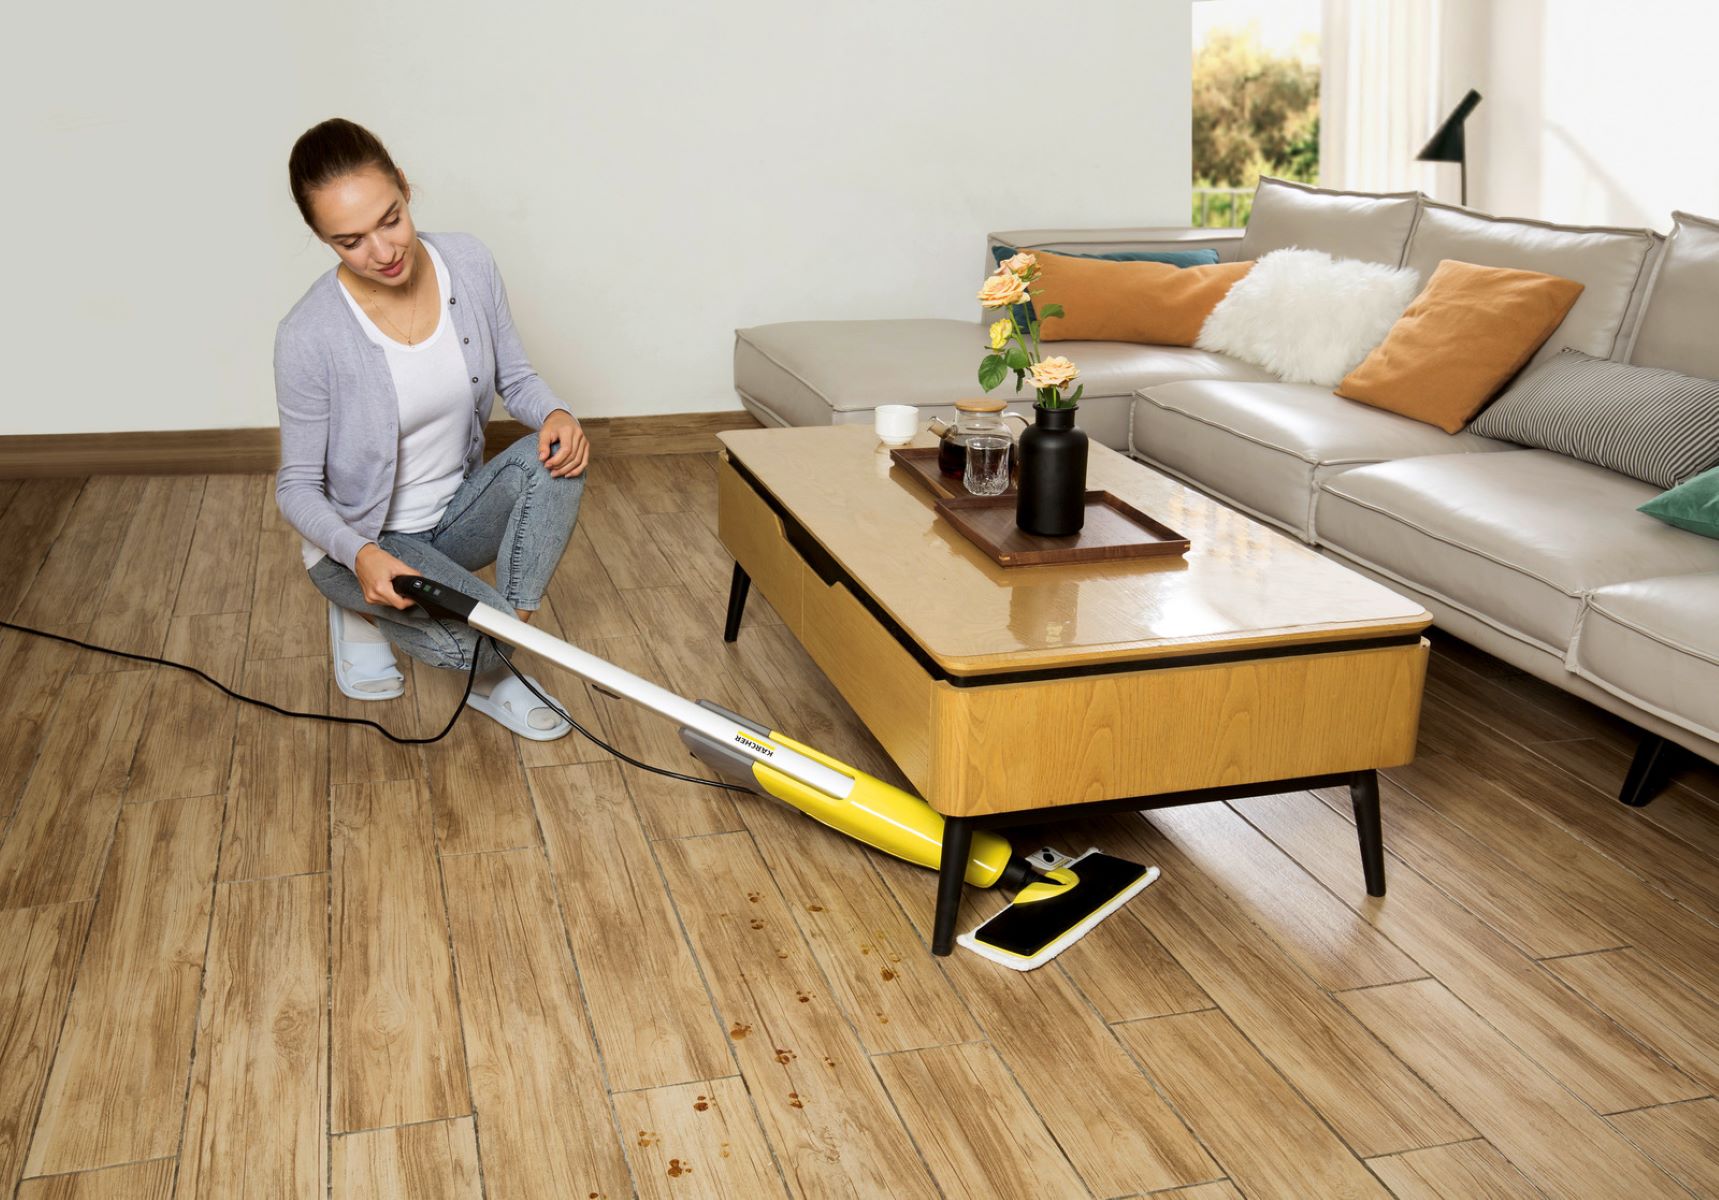 How To Use A Steam Mop On Laminate Floors